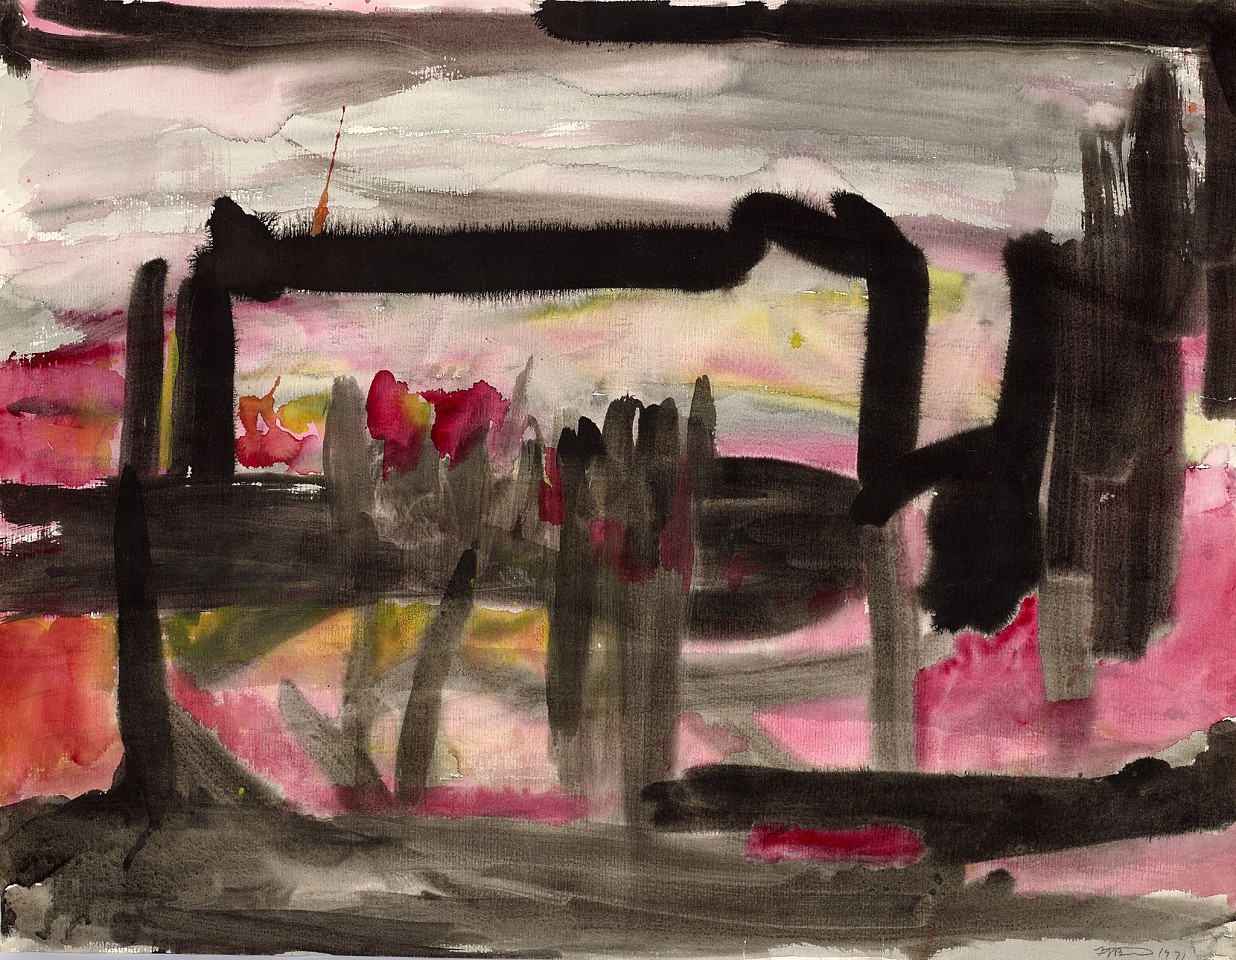 Frederick J. Brown, Untitled, 1971
Watercolor on paper, 19 5/8 x 25 3/8 in. (49.9 x 64.5 cm)
BROW-00014